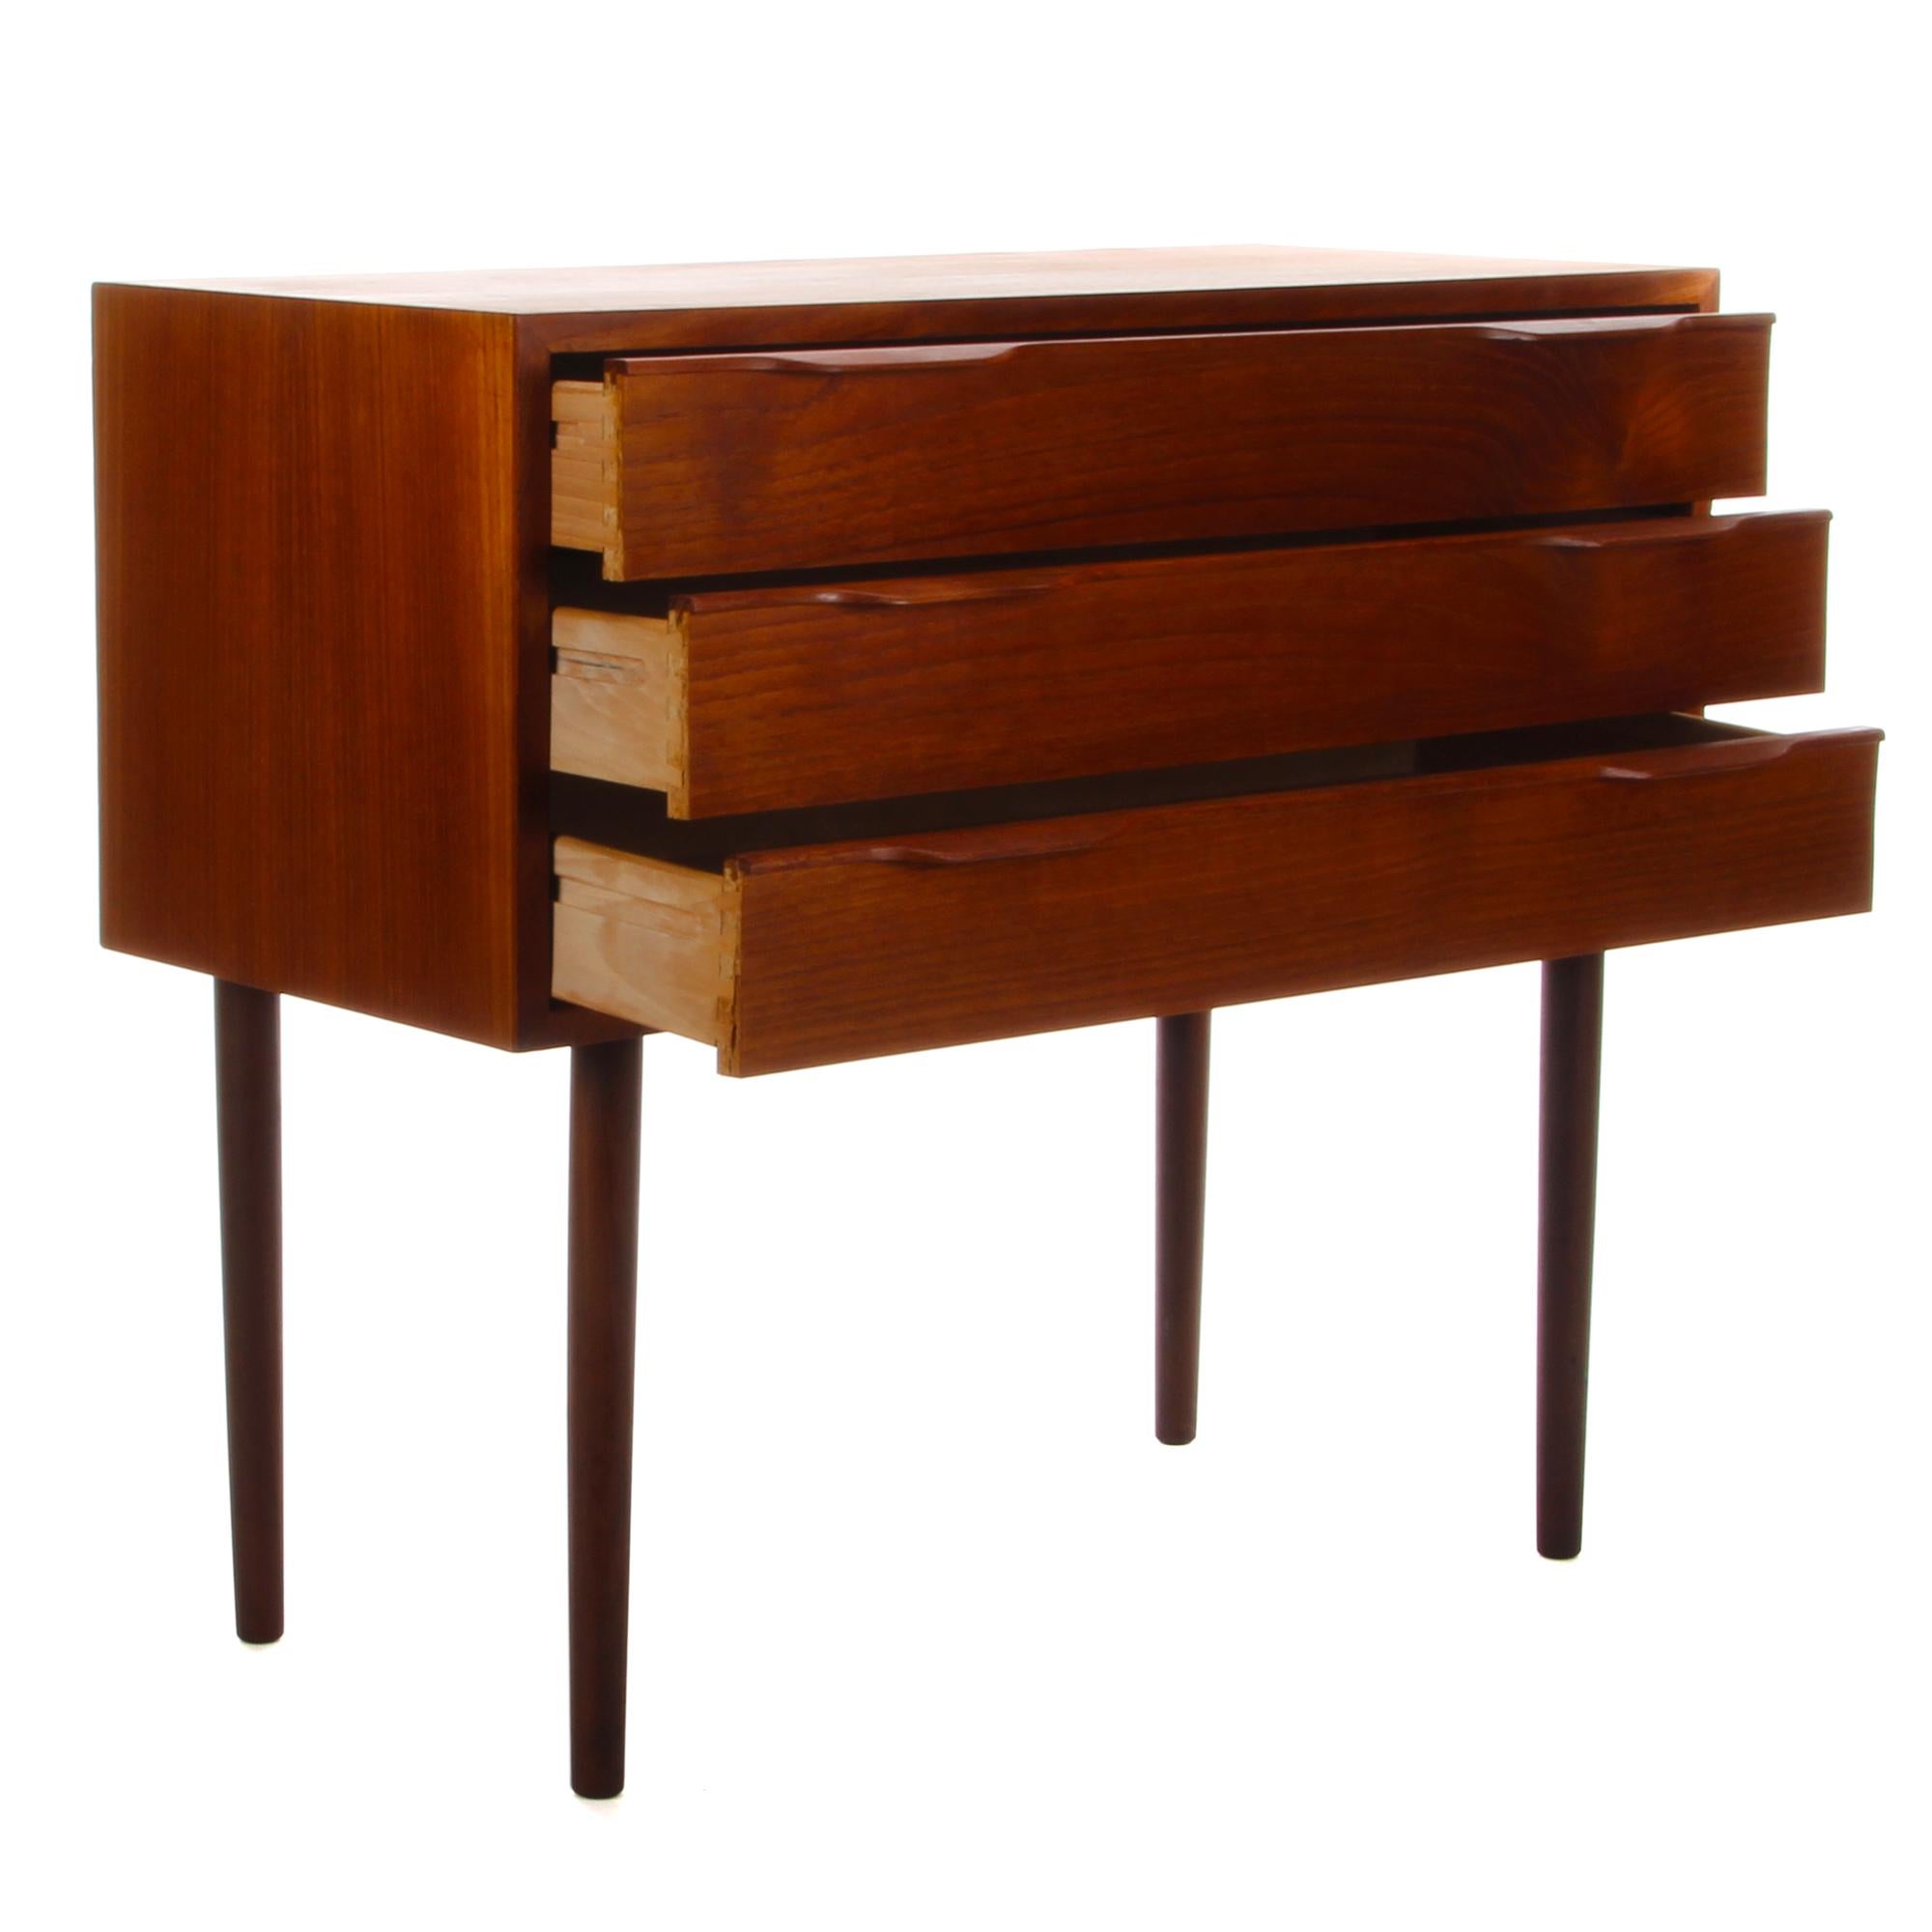 Veneer Teak Chest of Drawers from the 1960s, Danish Midcentury Dresser with Drawers